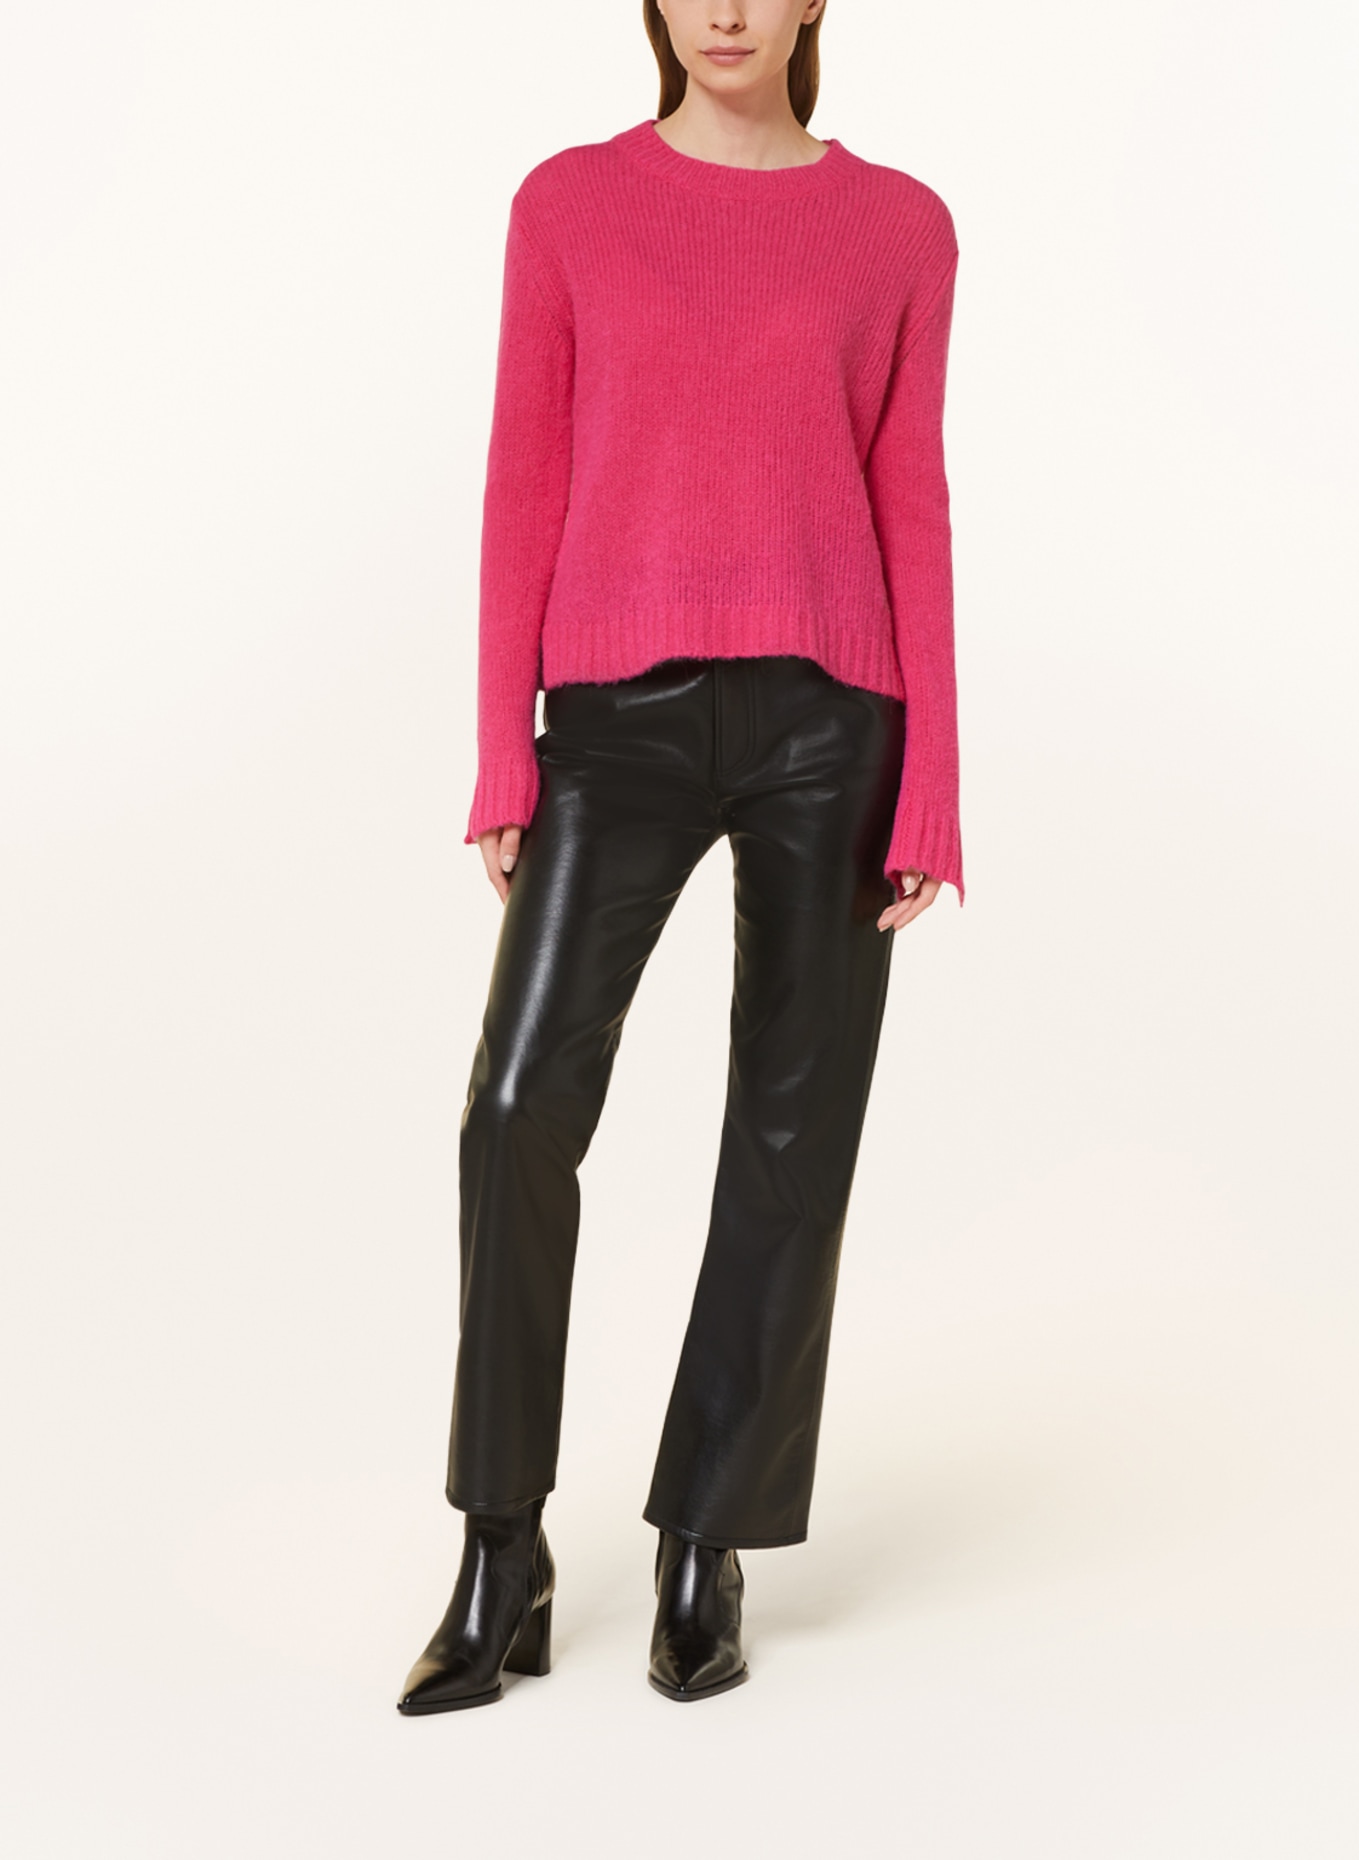 Princess GOES HOLLYWOOD Oversized sweater, Color: PINK (Image 2)